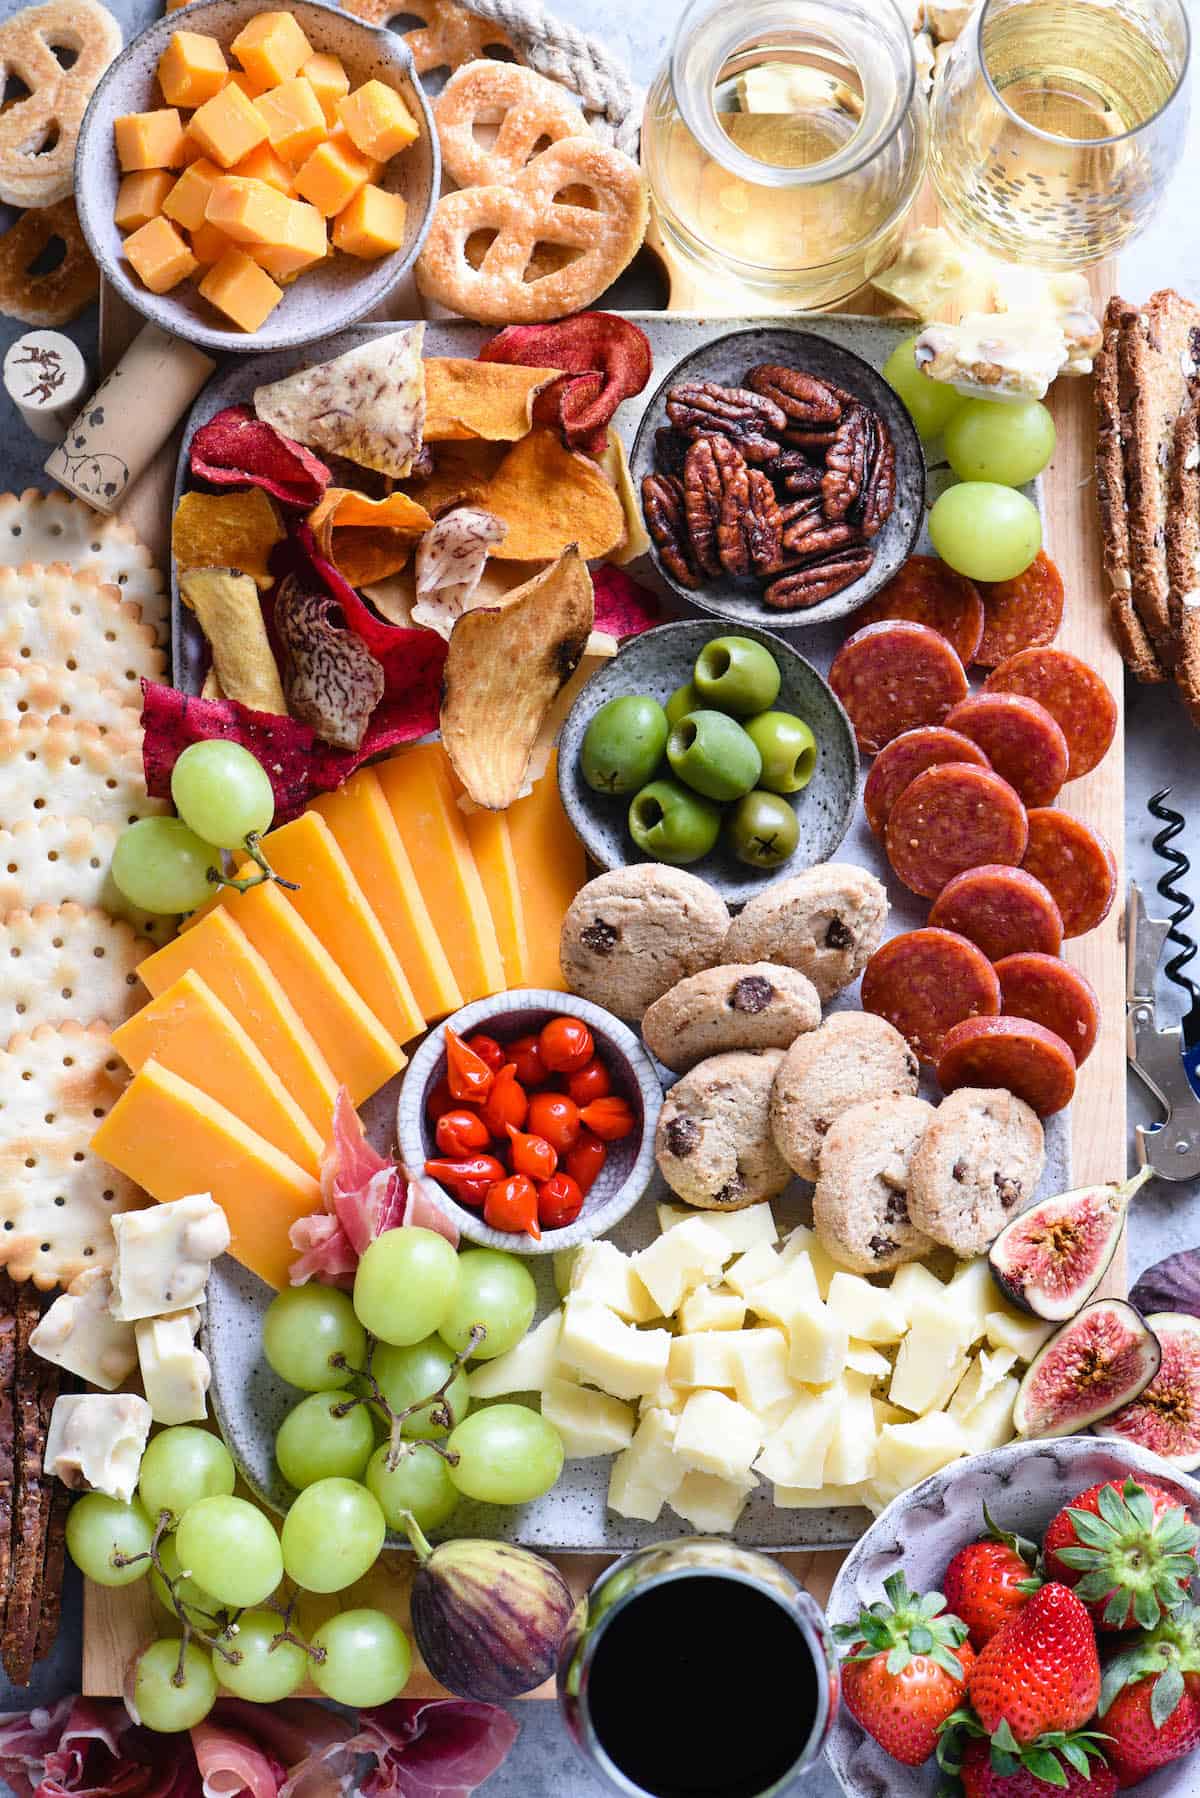 Making a cheese board for wine tasting? Follow this simple, down-to-earth guide to start pairing cheese, charcuterie and other snacks with wine! | foxeslovelemons.com